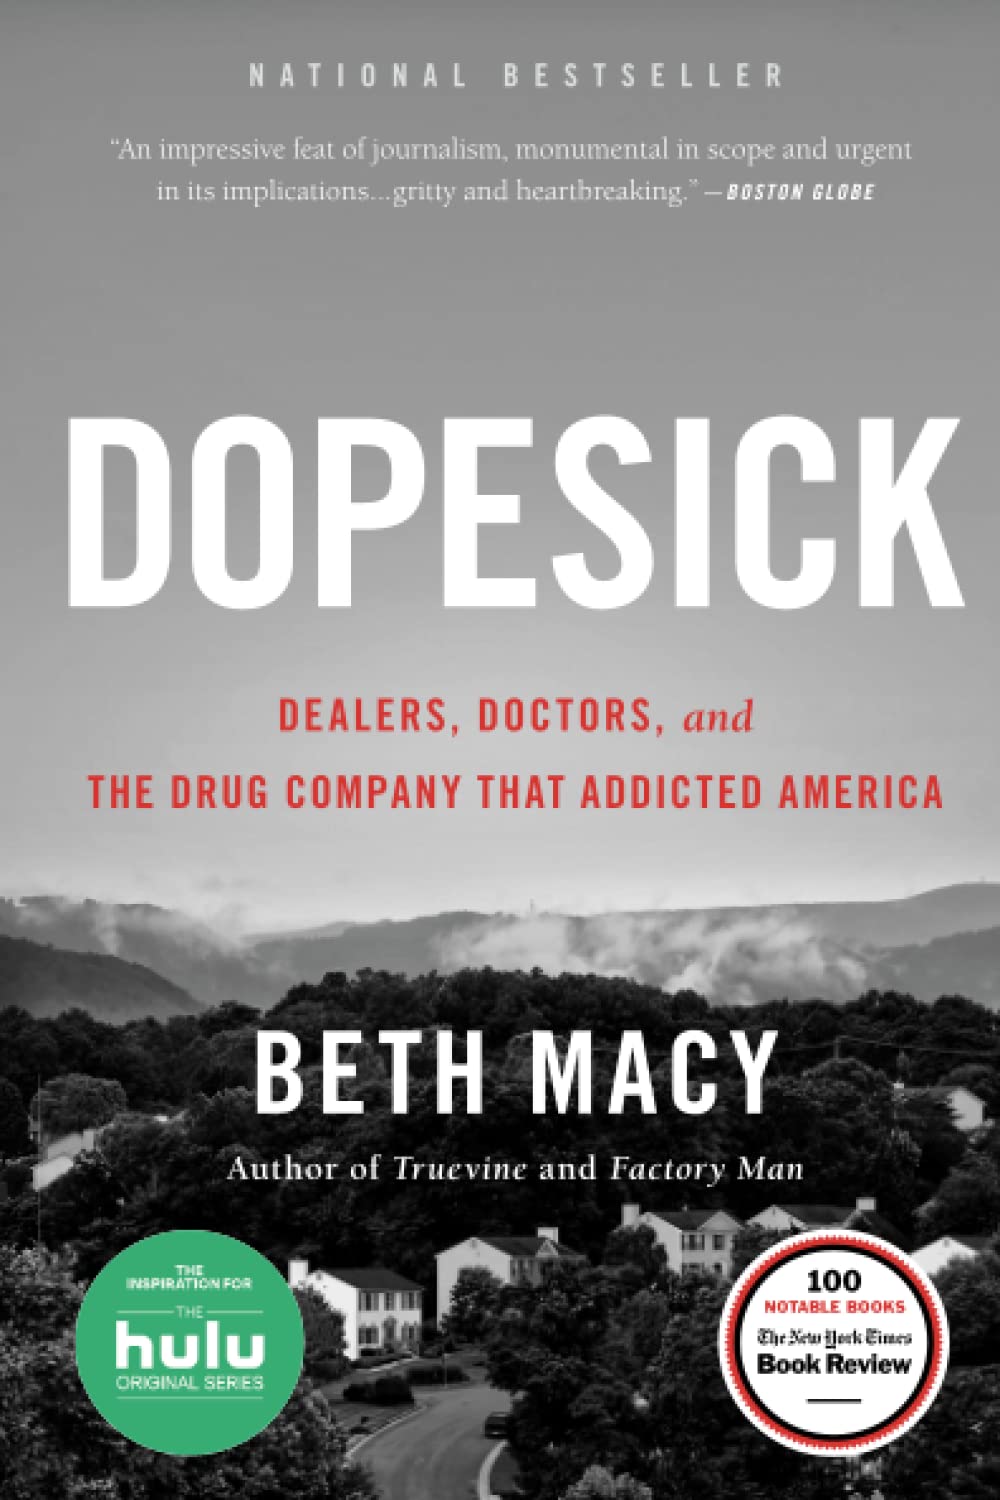 Dopesick: Dealers, Doctors, and the Drug Company that Addicted America, by Beth Macy